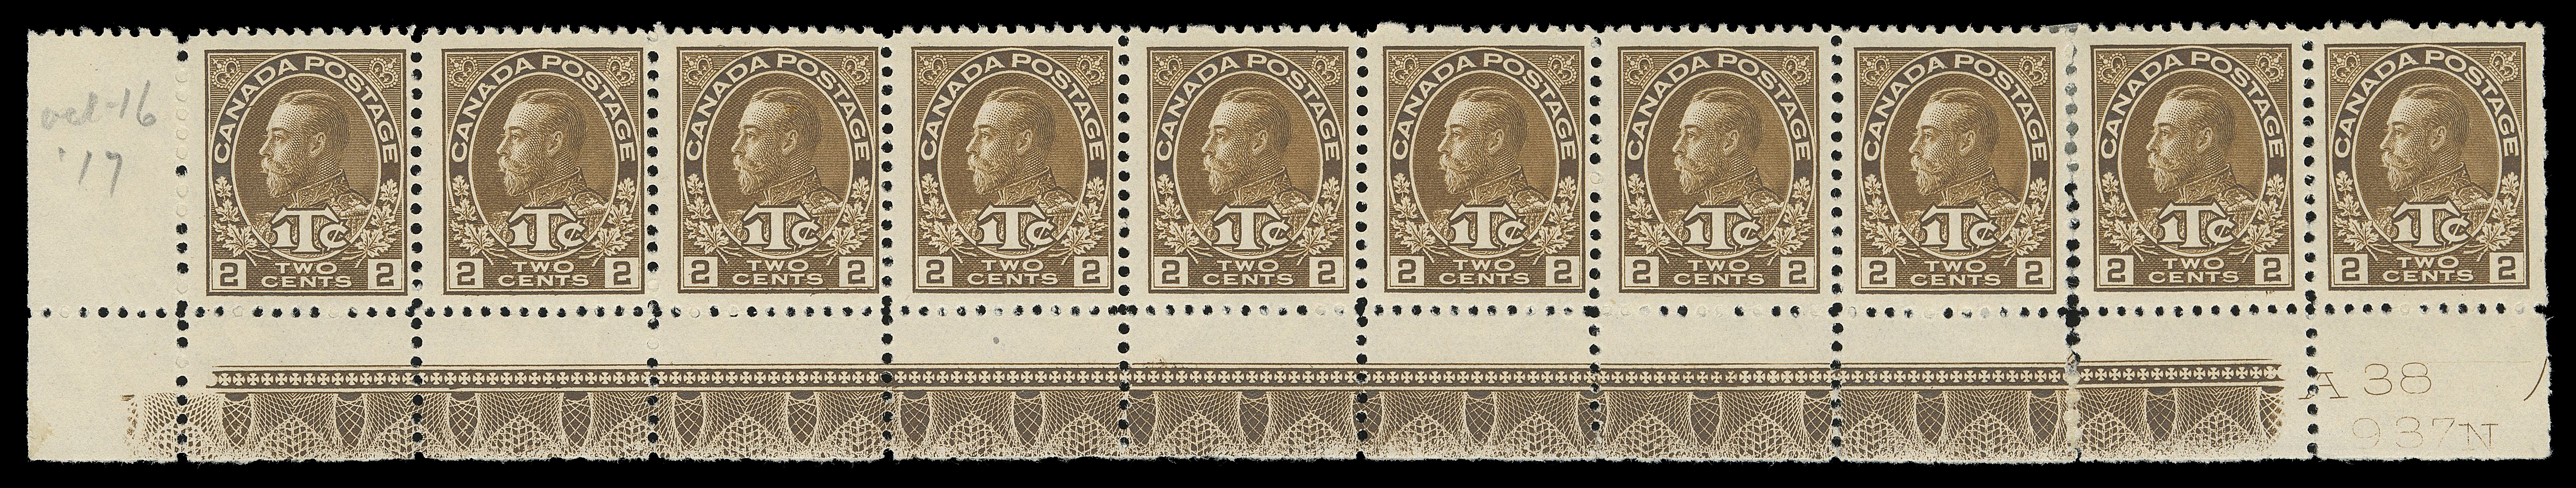 ADMIRAL STAMPS  MR4,A fresh mint lower left strip of ten, plate "A38" and printing order number "937N" below Position 100 and strong, full Type A lathework on others, small area of DOUBLE lathework (4mm wide) below Position 97. Perfs severed between eighth & ninth stamps supported by a hinge, end stamps hinged, six lathework stamps are NH, F-VF; pencilled "Oct 16 